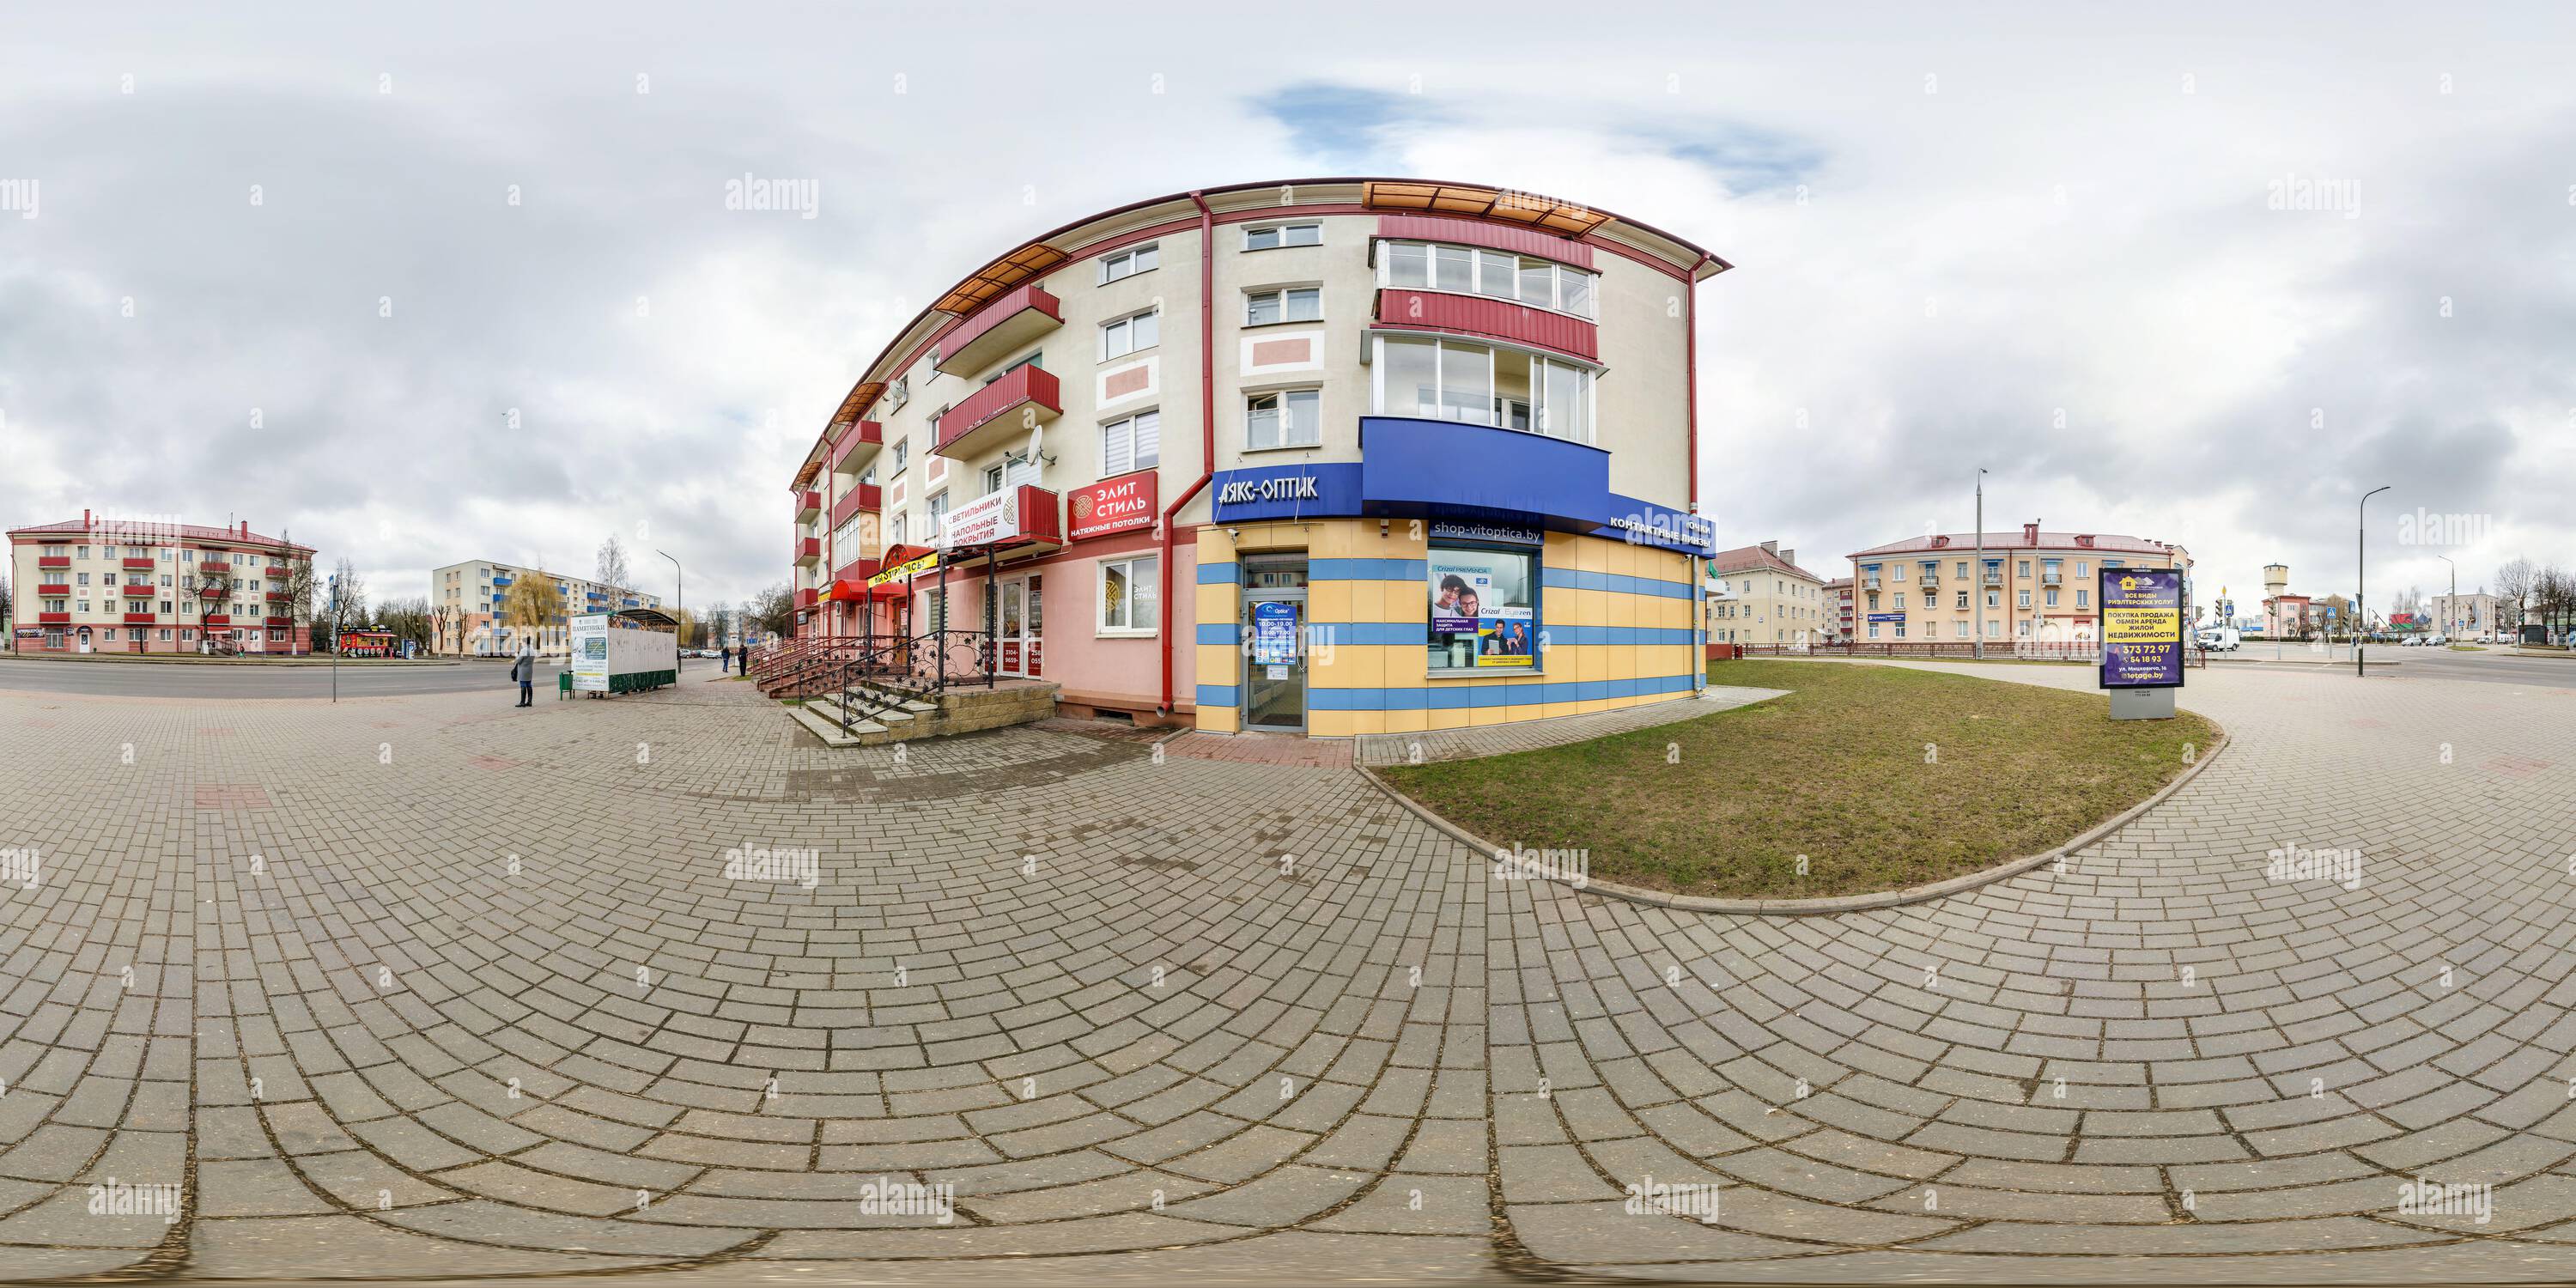 360 degree panoramic view of GRODNO, BELARUS - JULY 2021: full seamless spherical hdri panorama 360 view on crossroads street near multistory building area of urban development in